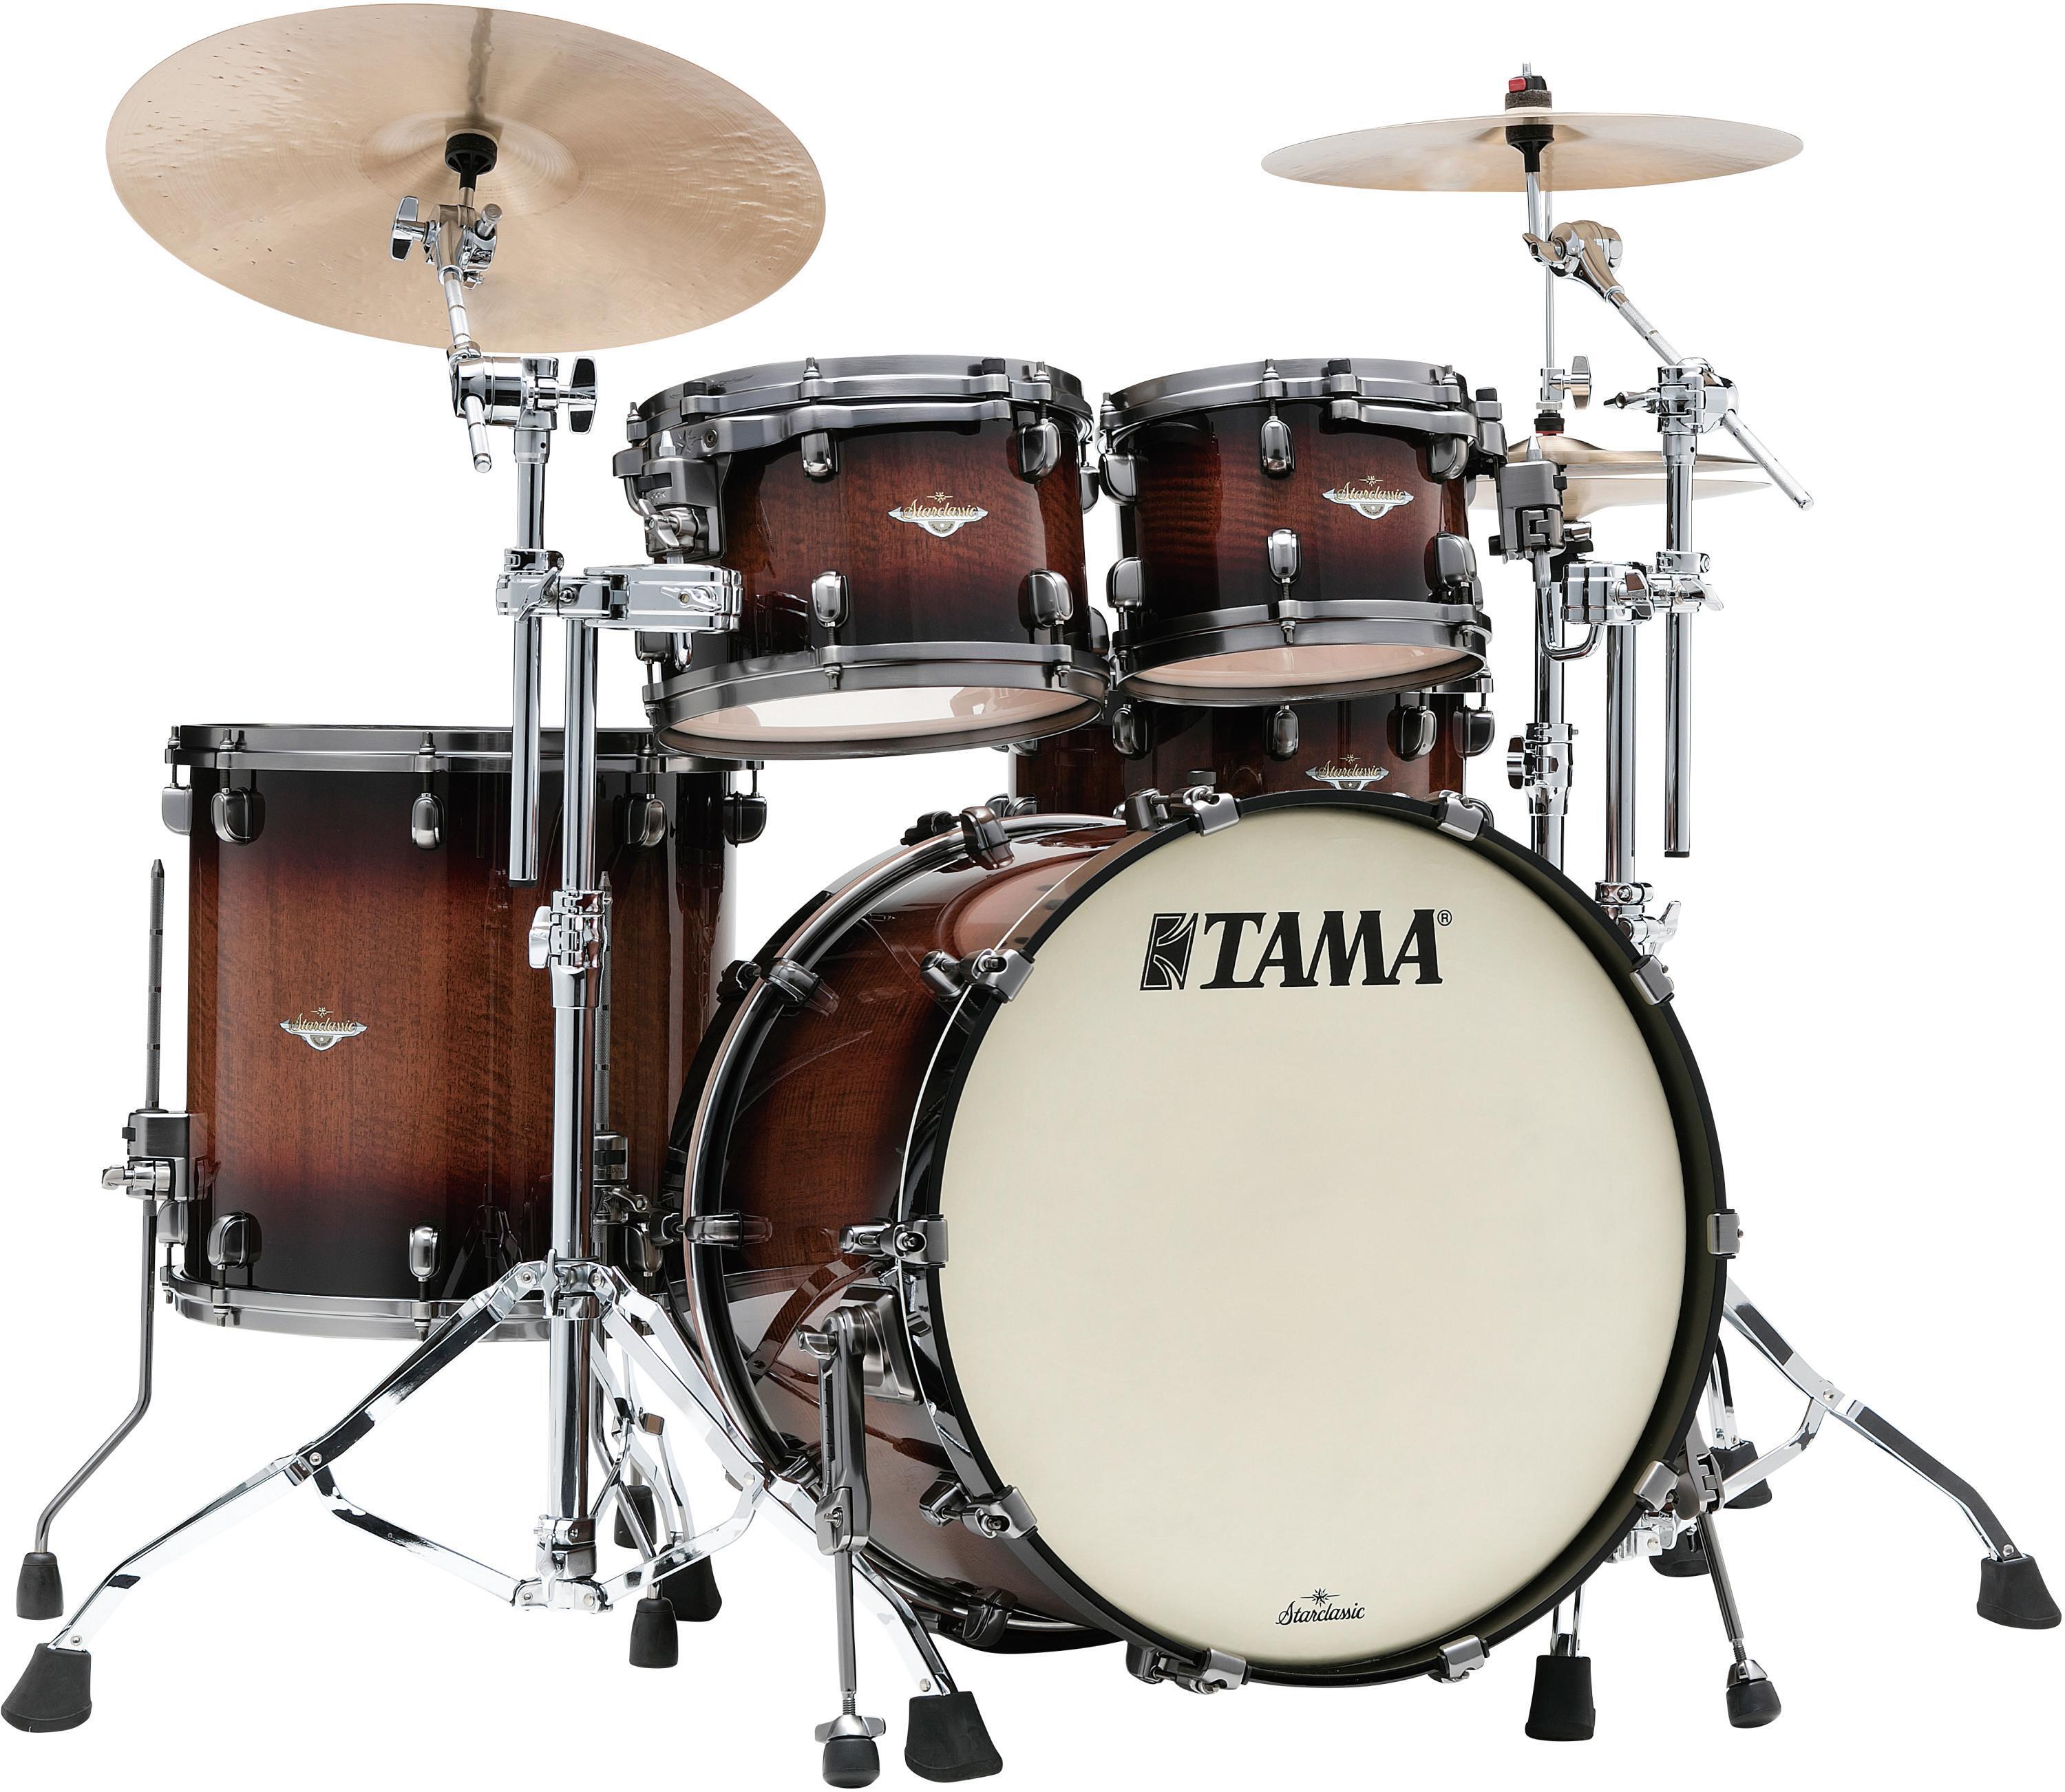 Tama Starclassic Maple ME42TZUS 4-piece Shell Pack - Tobacco